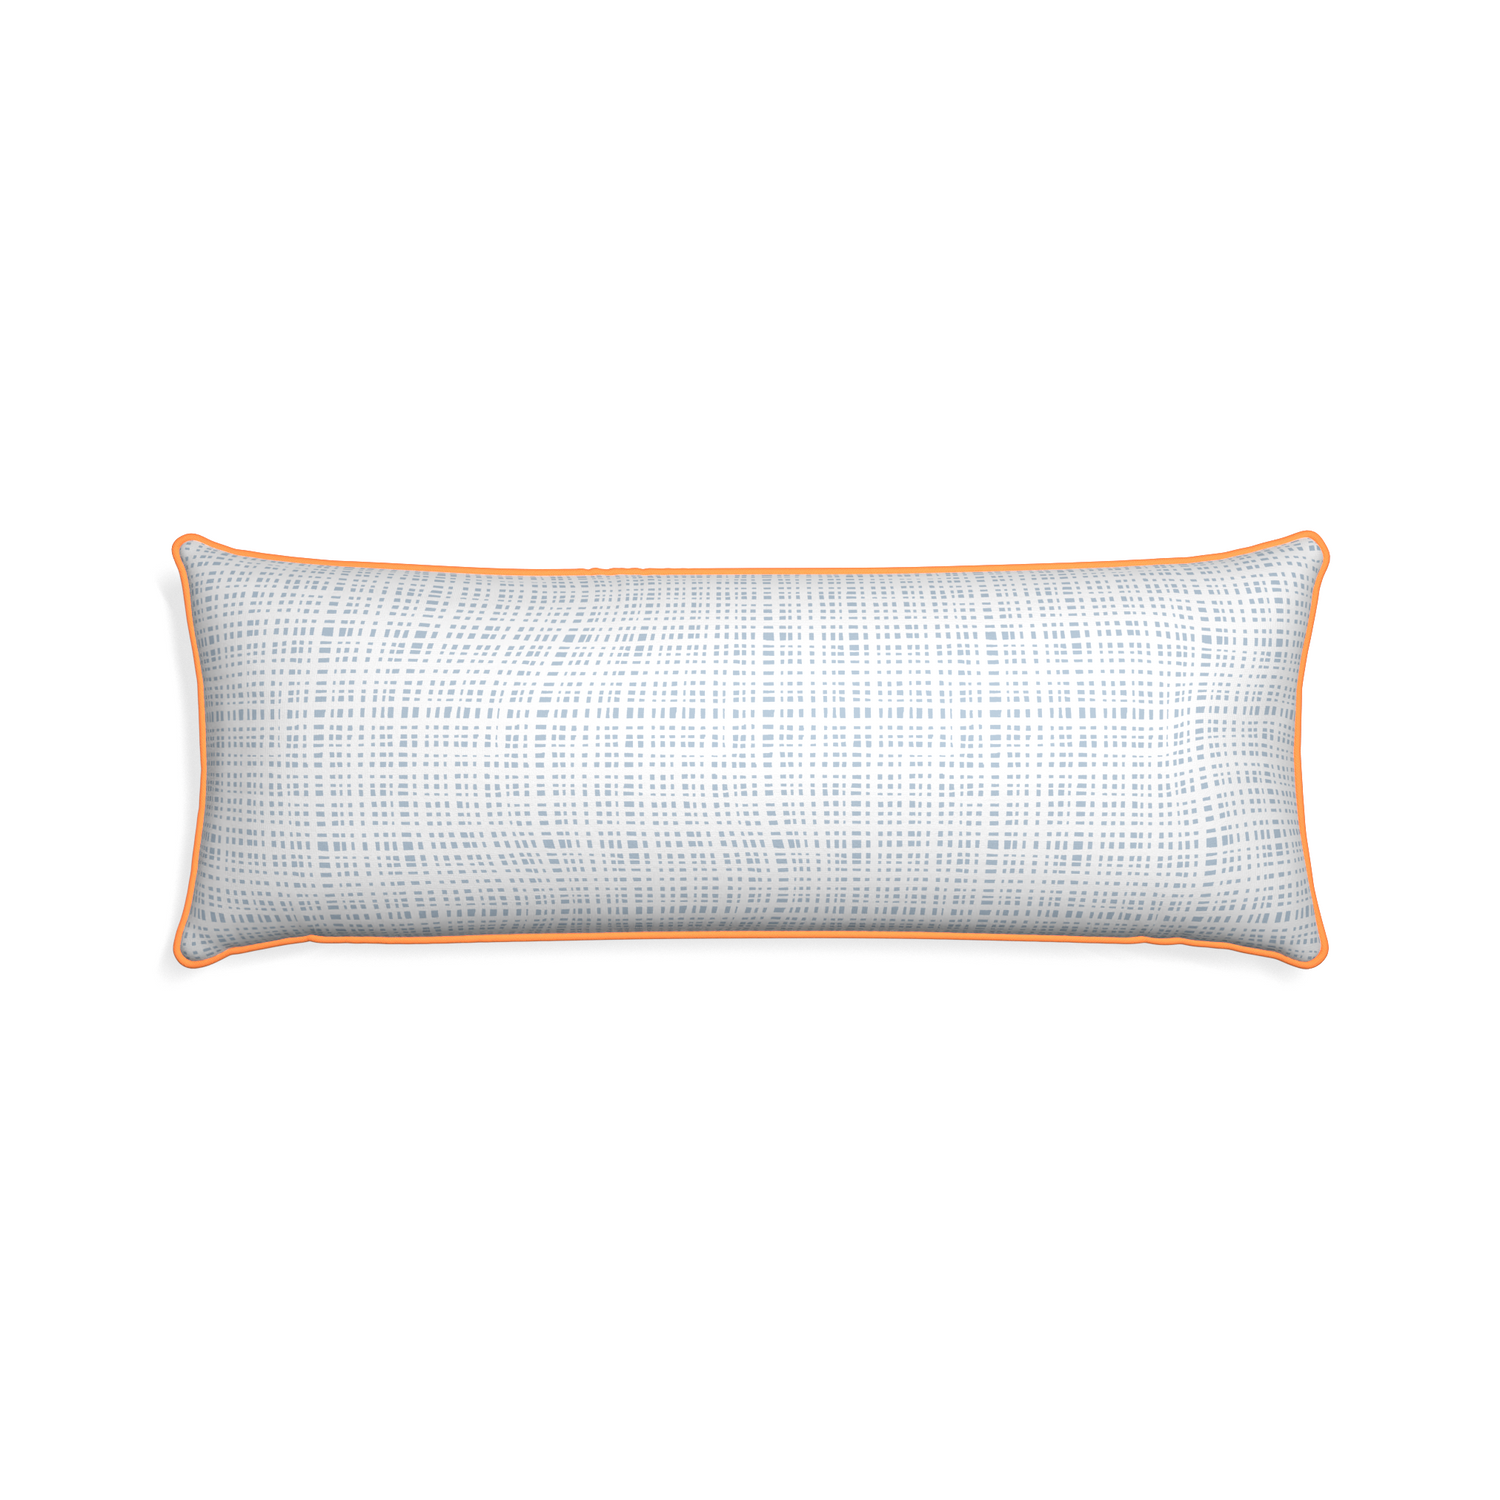 Xl-lumbar ginger custom plaid sky bluepillow with clementine piping on white background